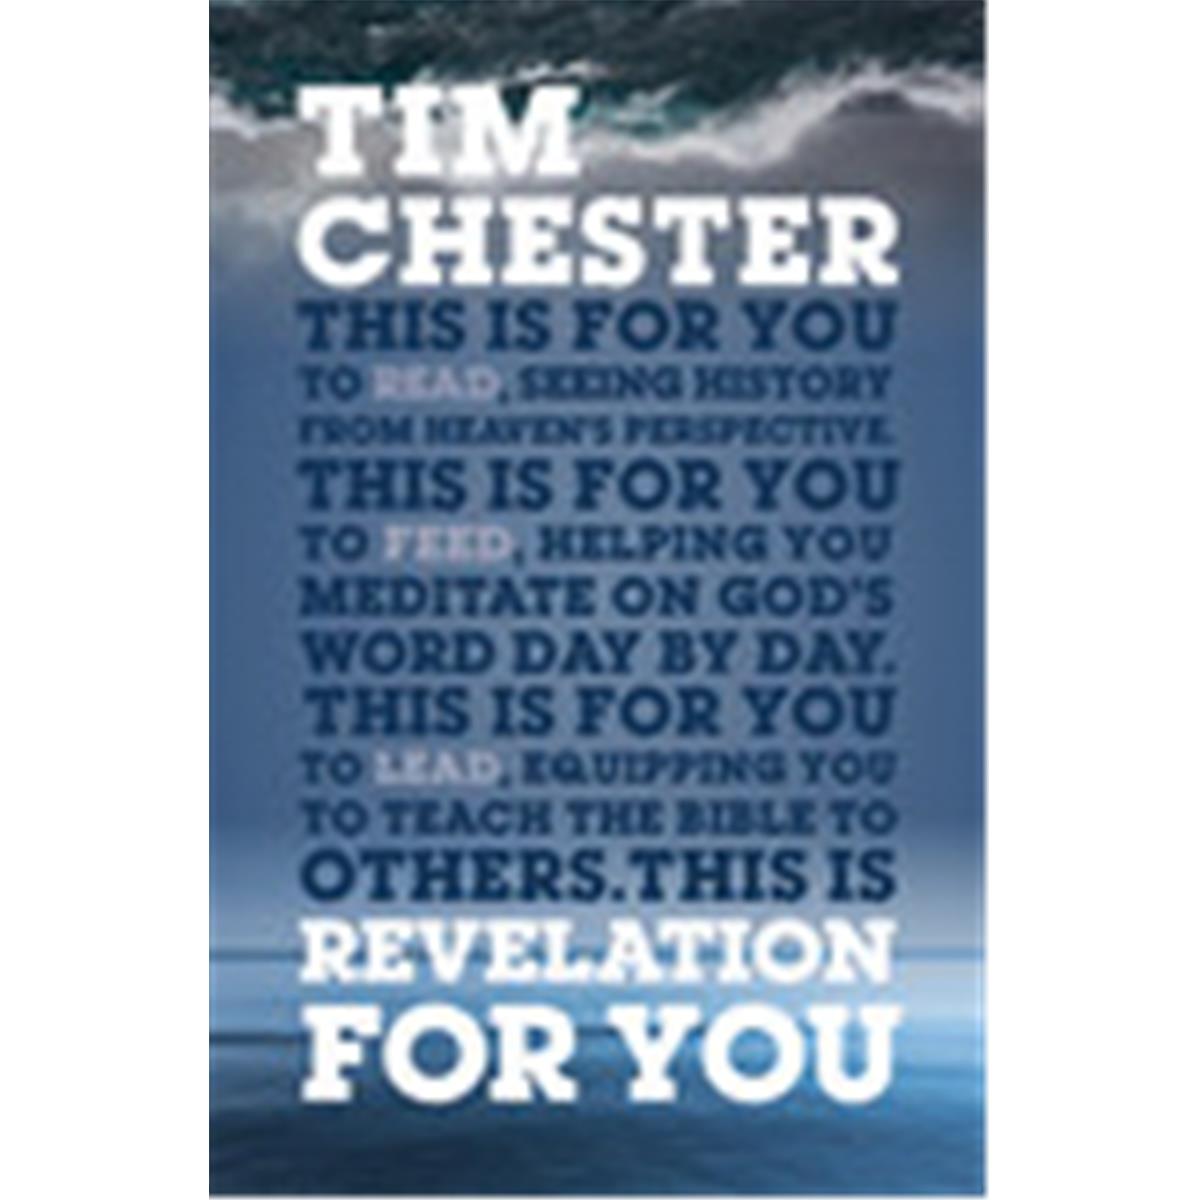 The Good Book 137926 Revelation For You By Chester Tim